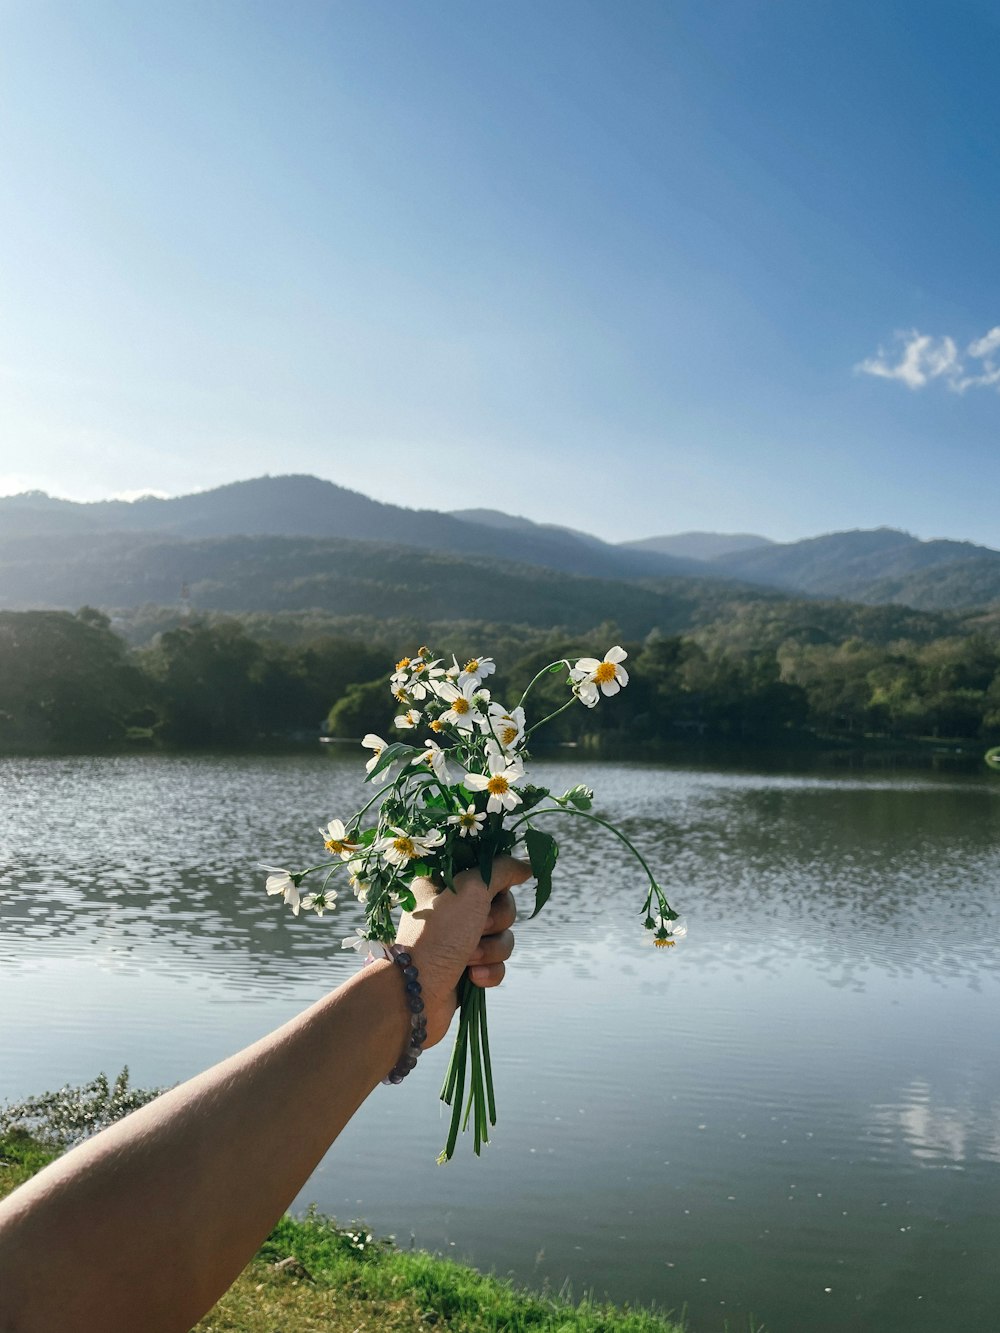 a hand holding flowers by a lake